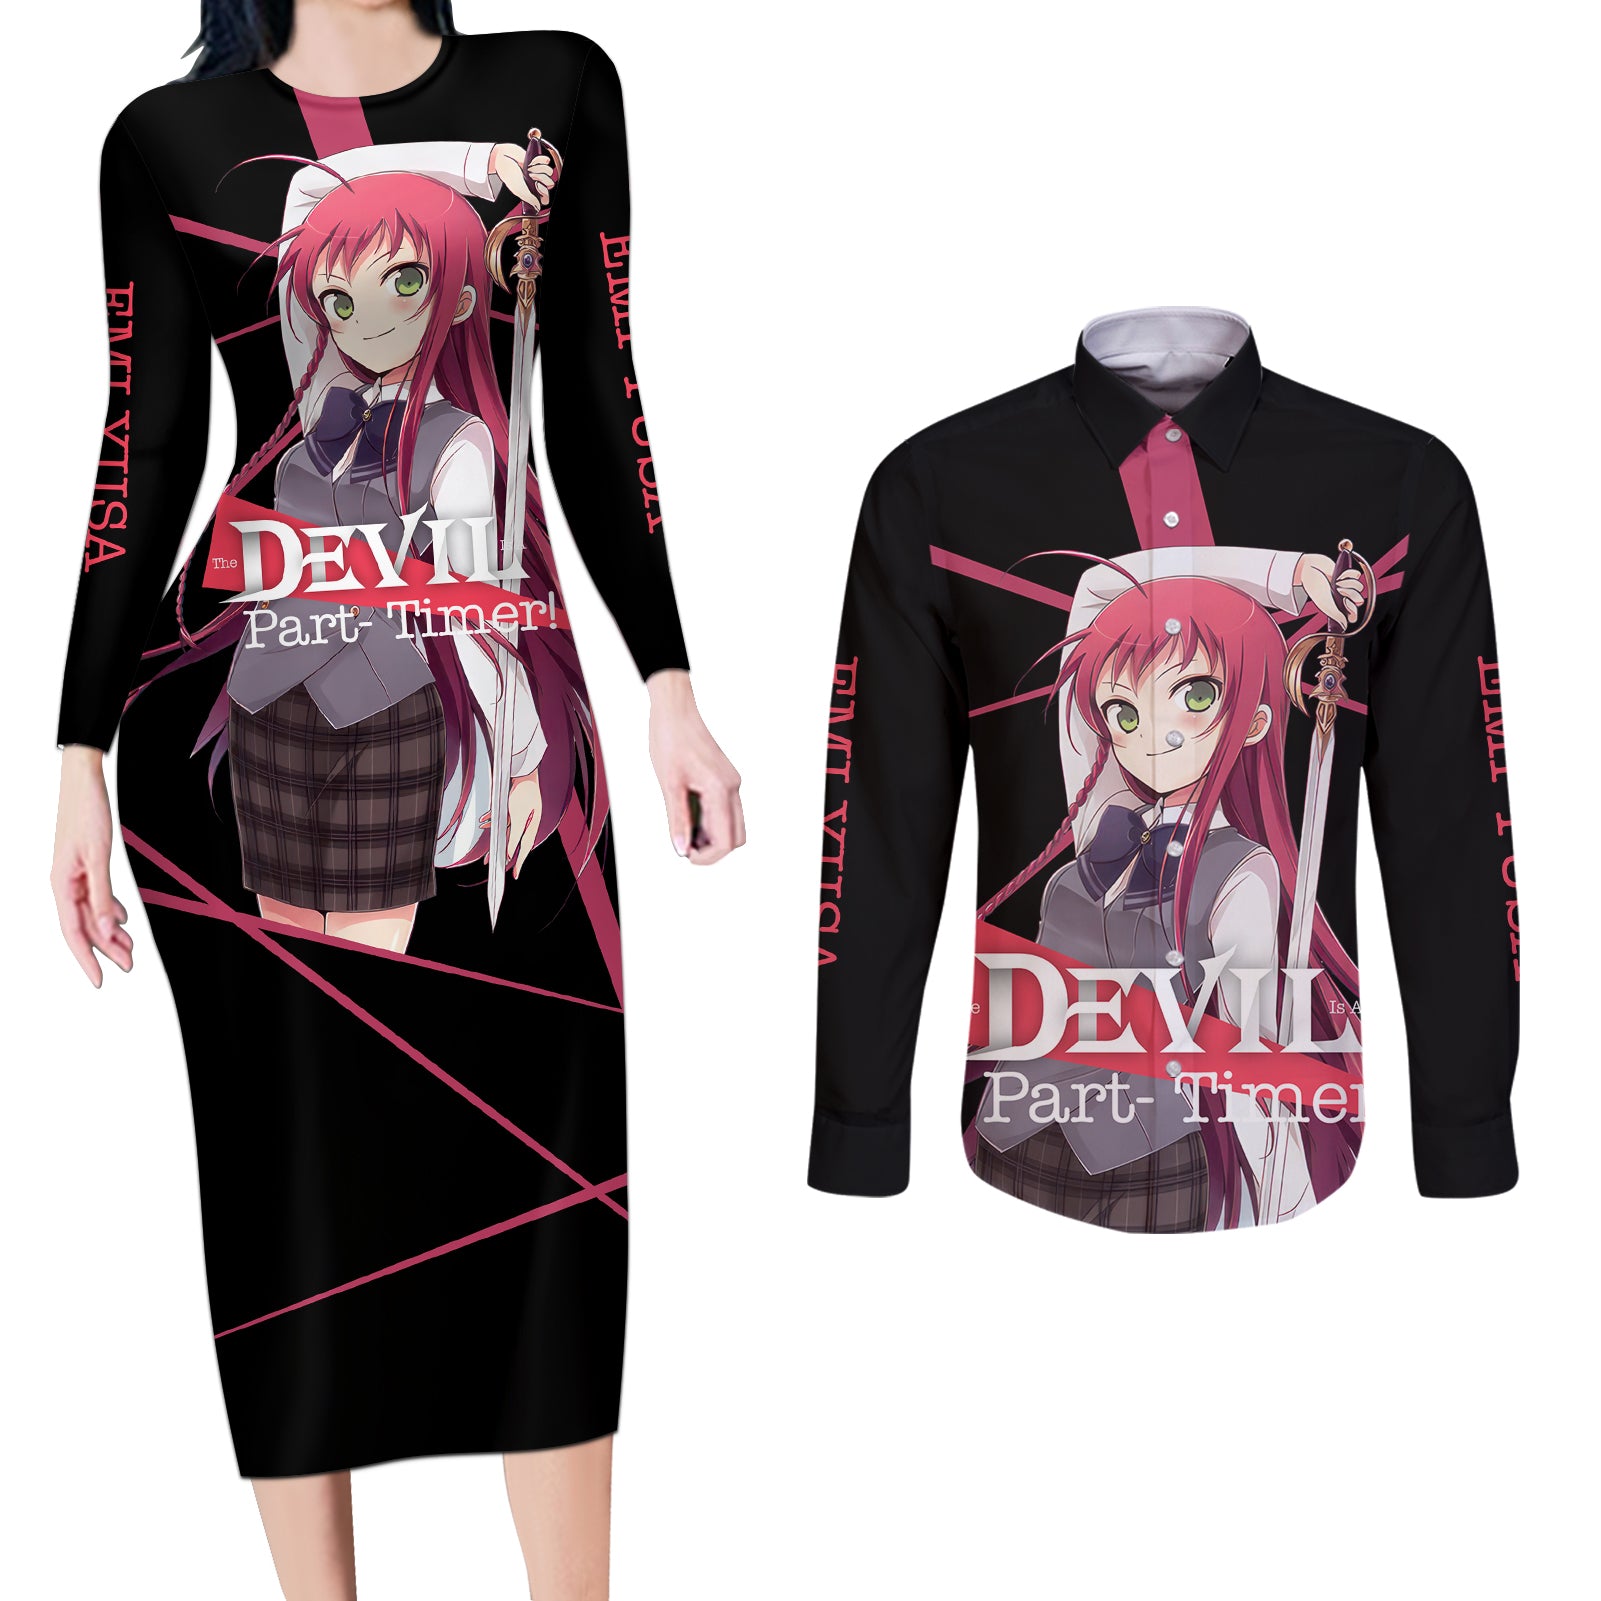 Emi Yusa The Devil Part Timer Couples Matching Long Sleeve Bodycon Dress and Long Sleeve Button Shirt Anime Style